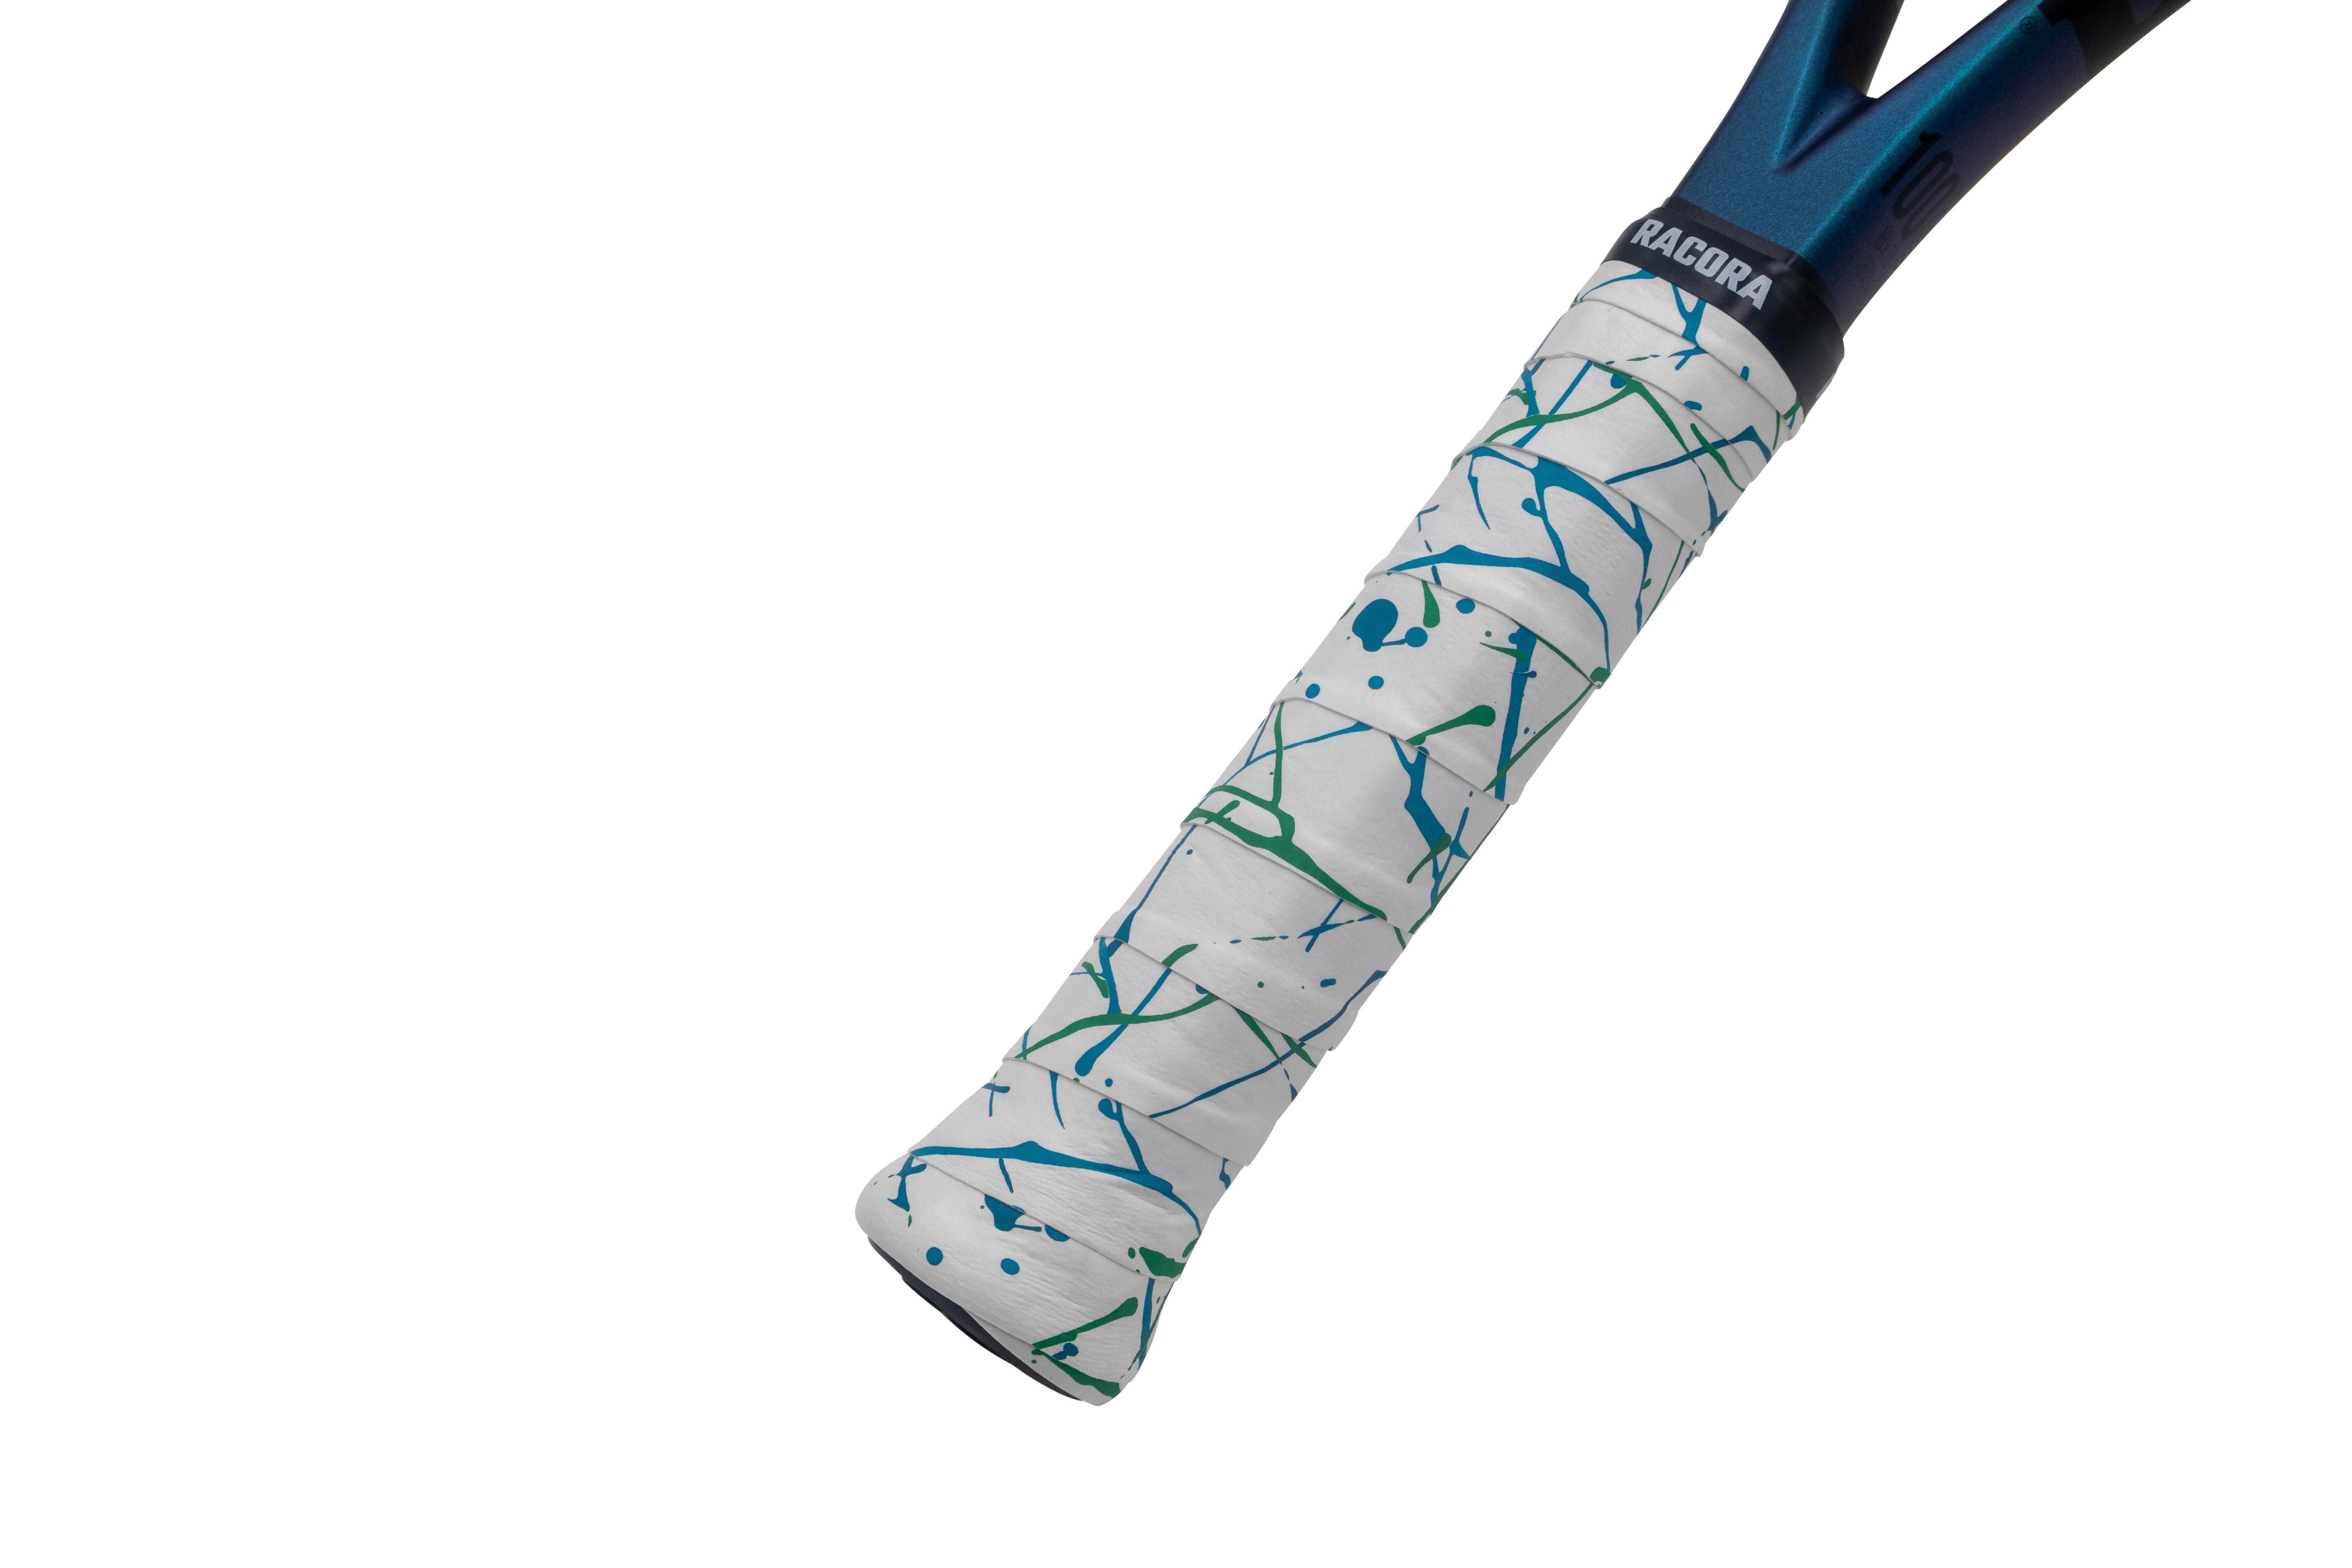 Racora Wild Drip tennis overgrip on tennis racket, held at an angle